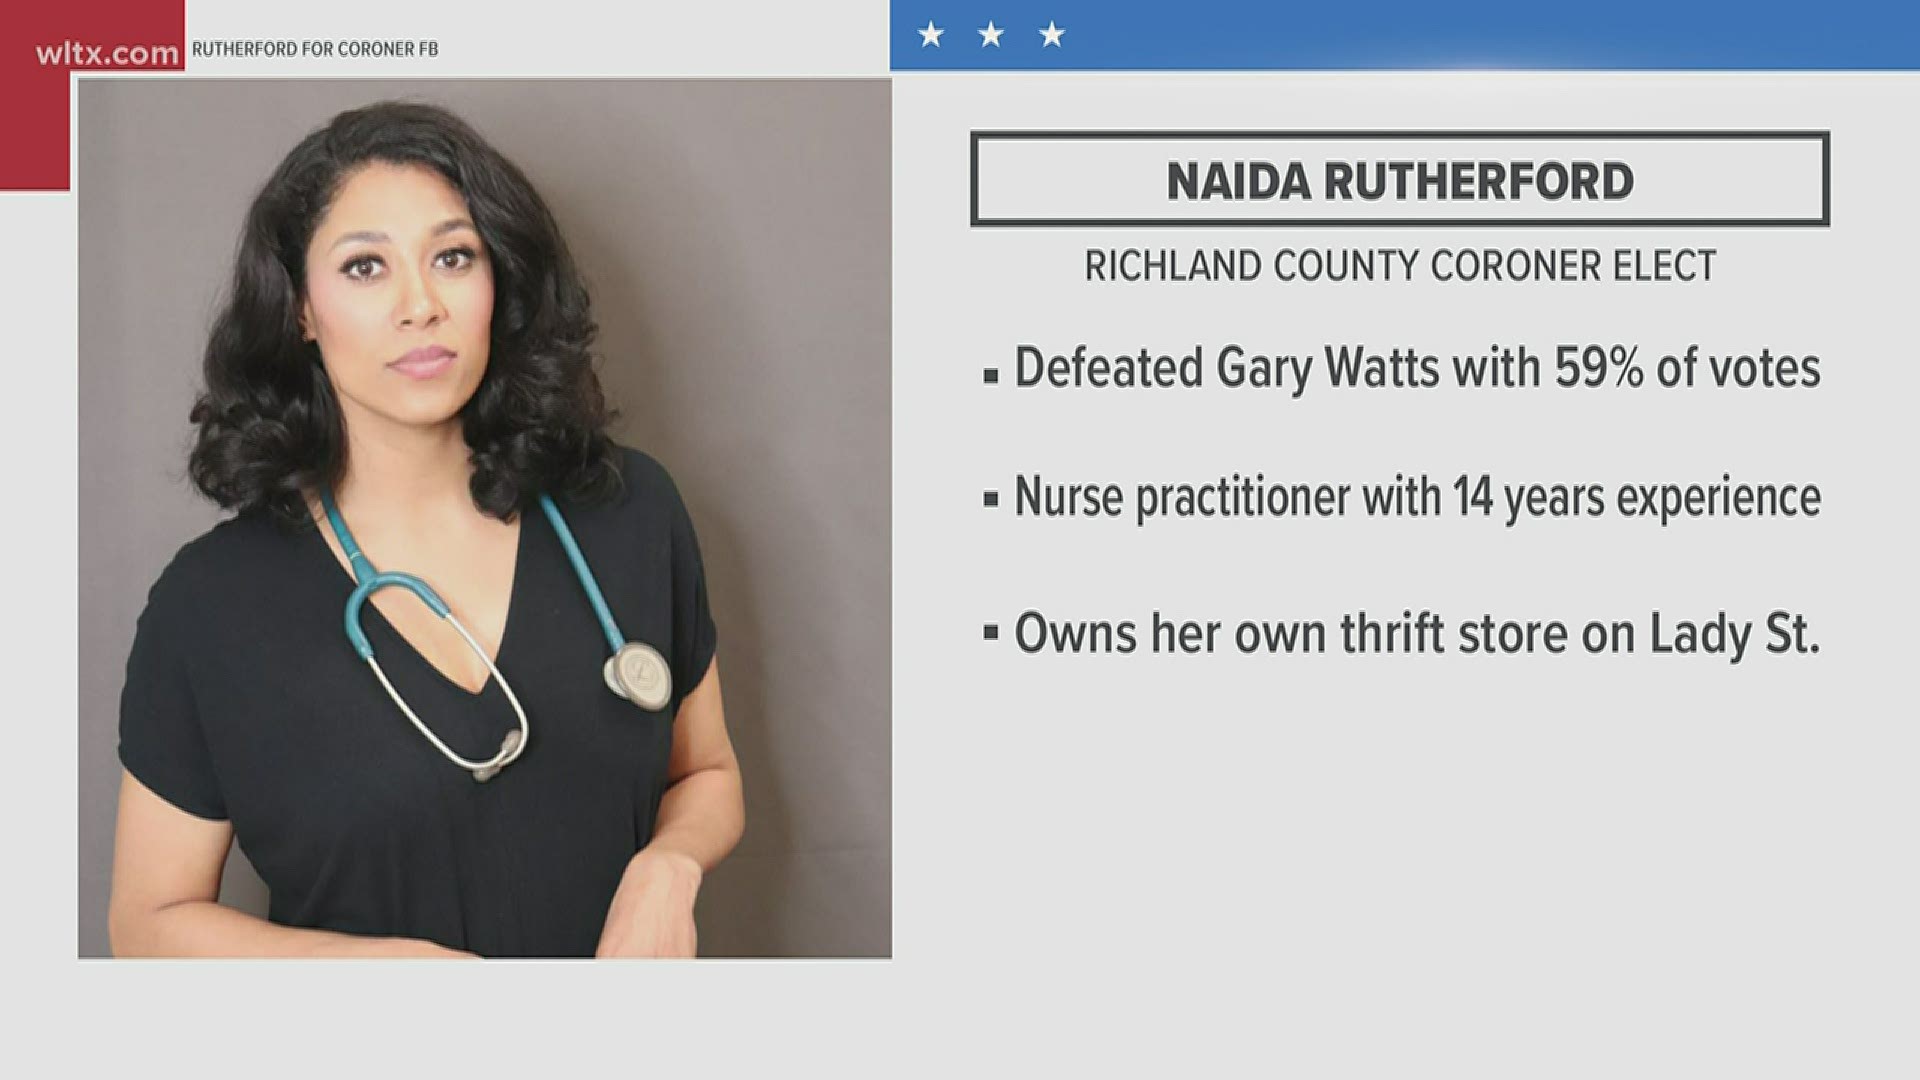 Naida Rutherford won the primary in Richland county for the job of coroner, she will be unopposed in November.